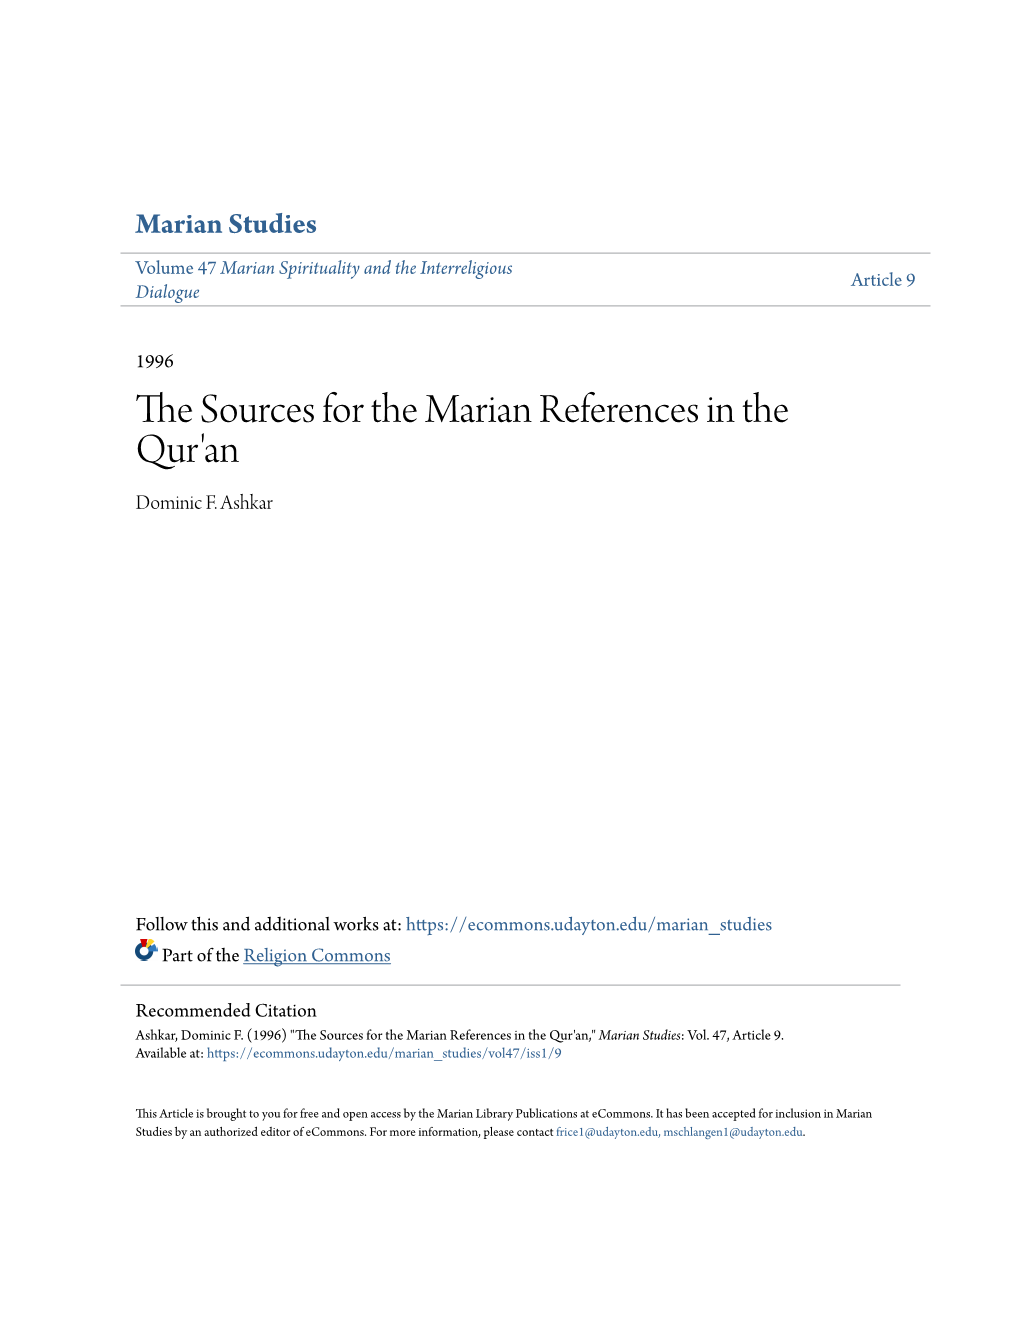 The Sources for the Marian References in the Qur'an